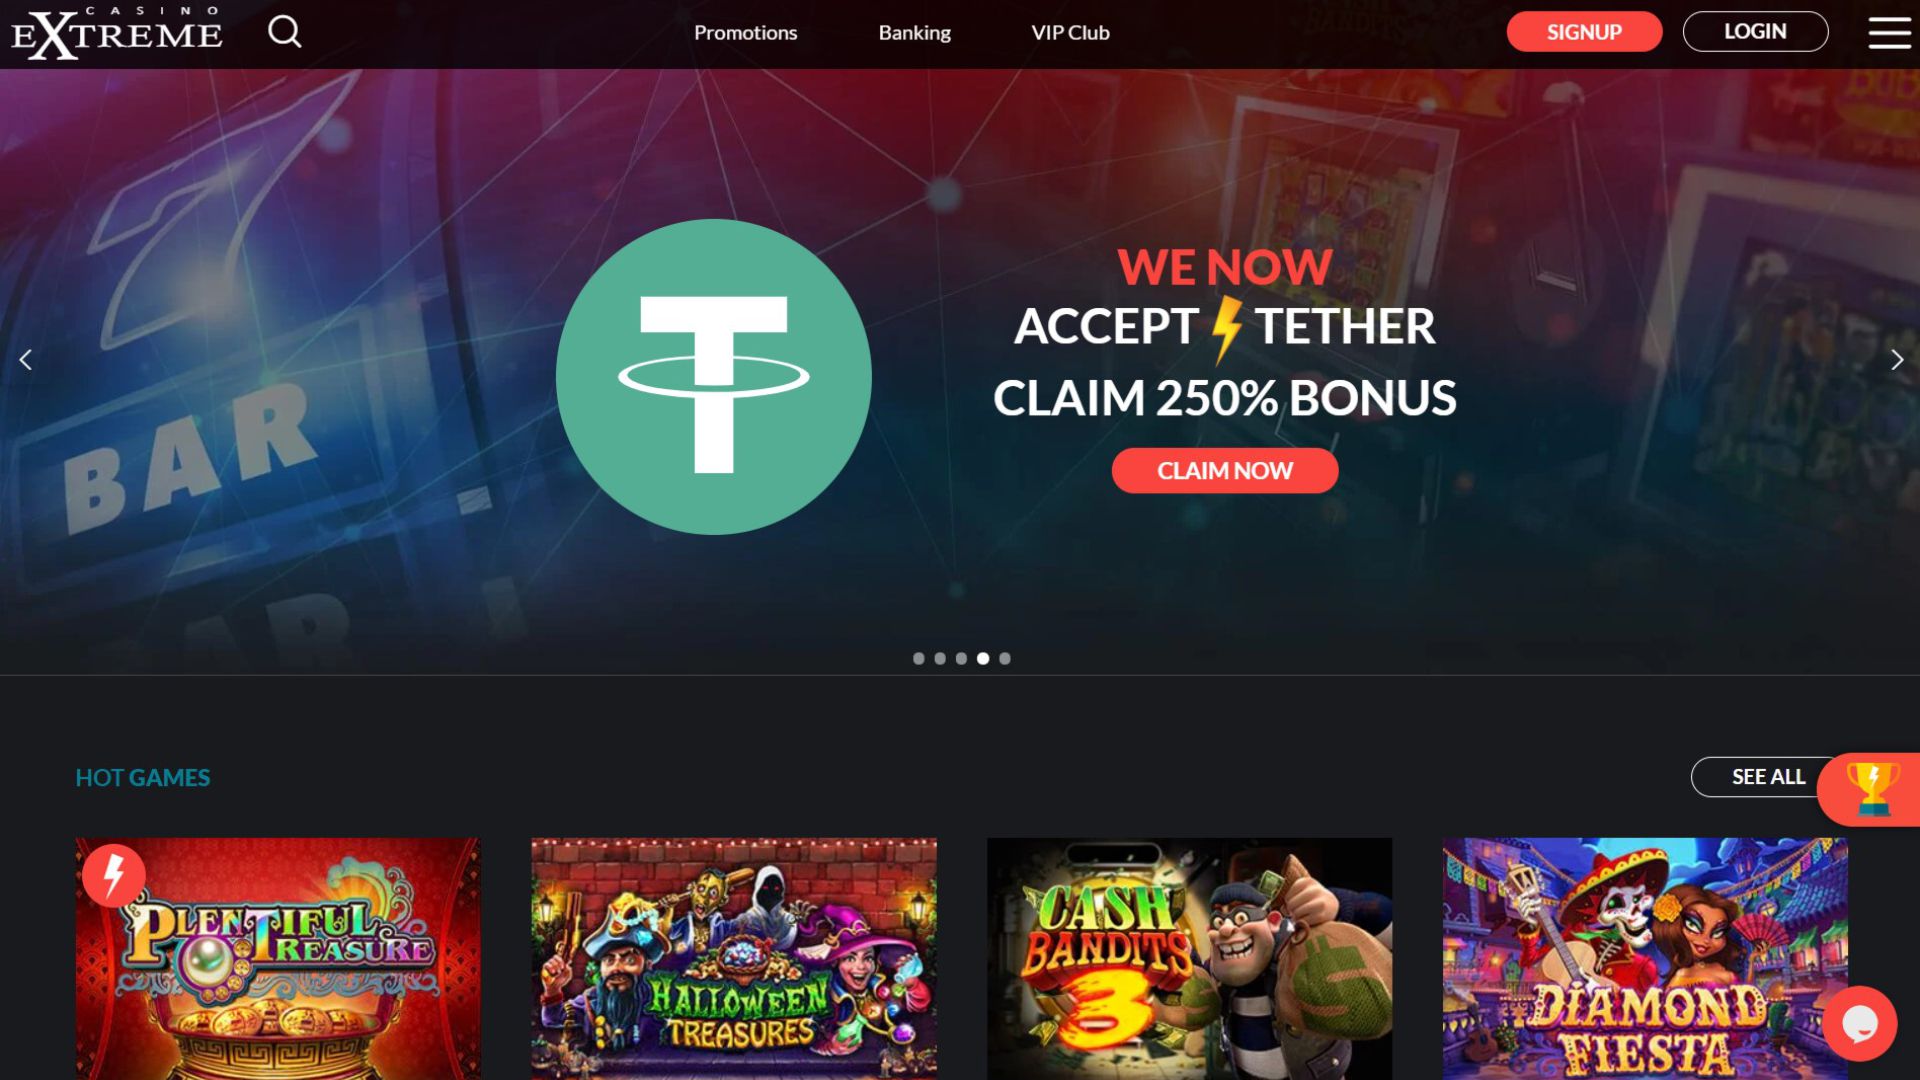 casino extreme free spins 2022